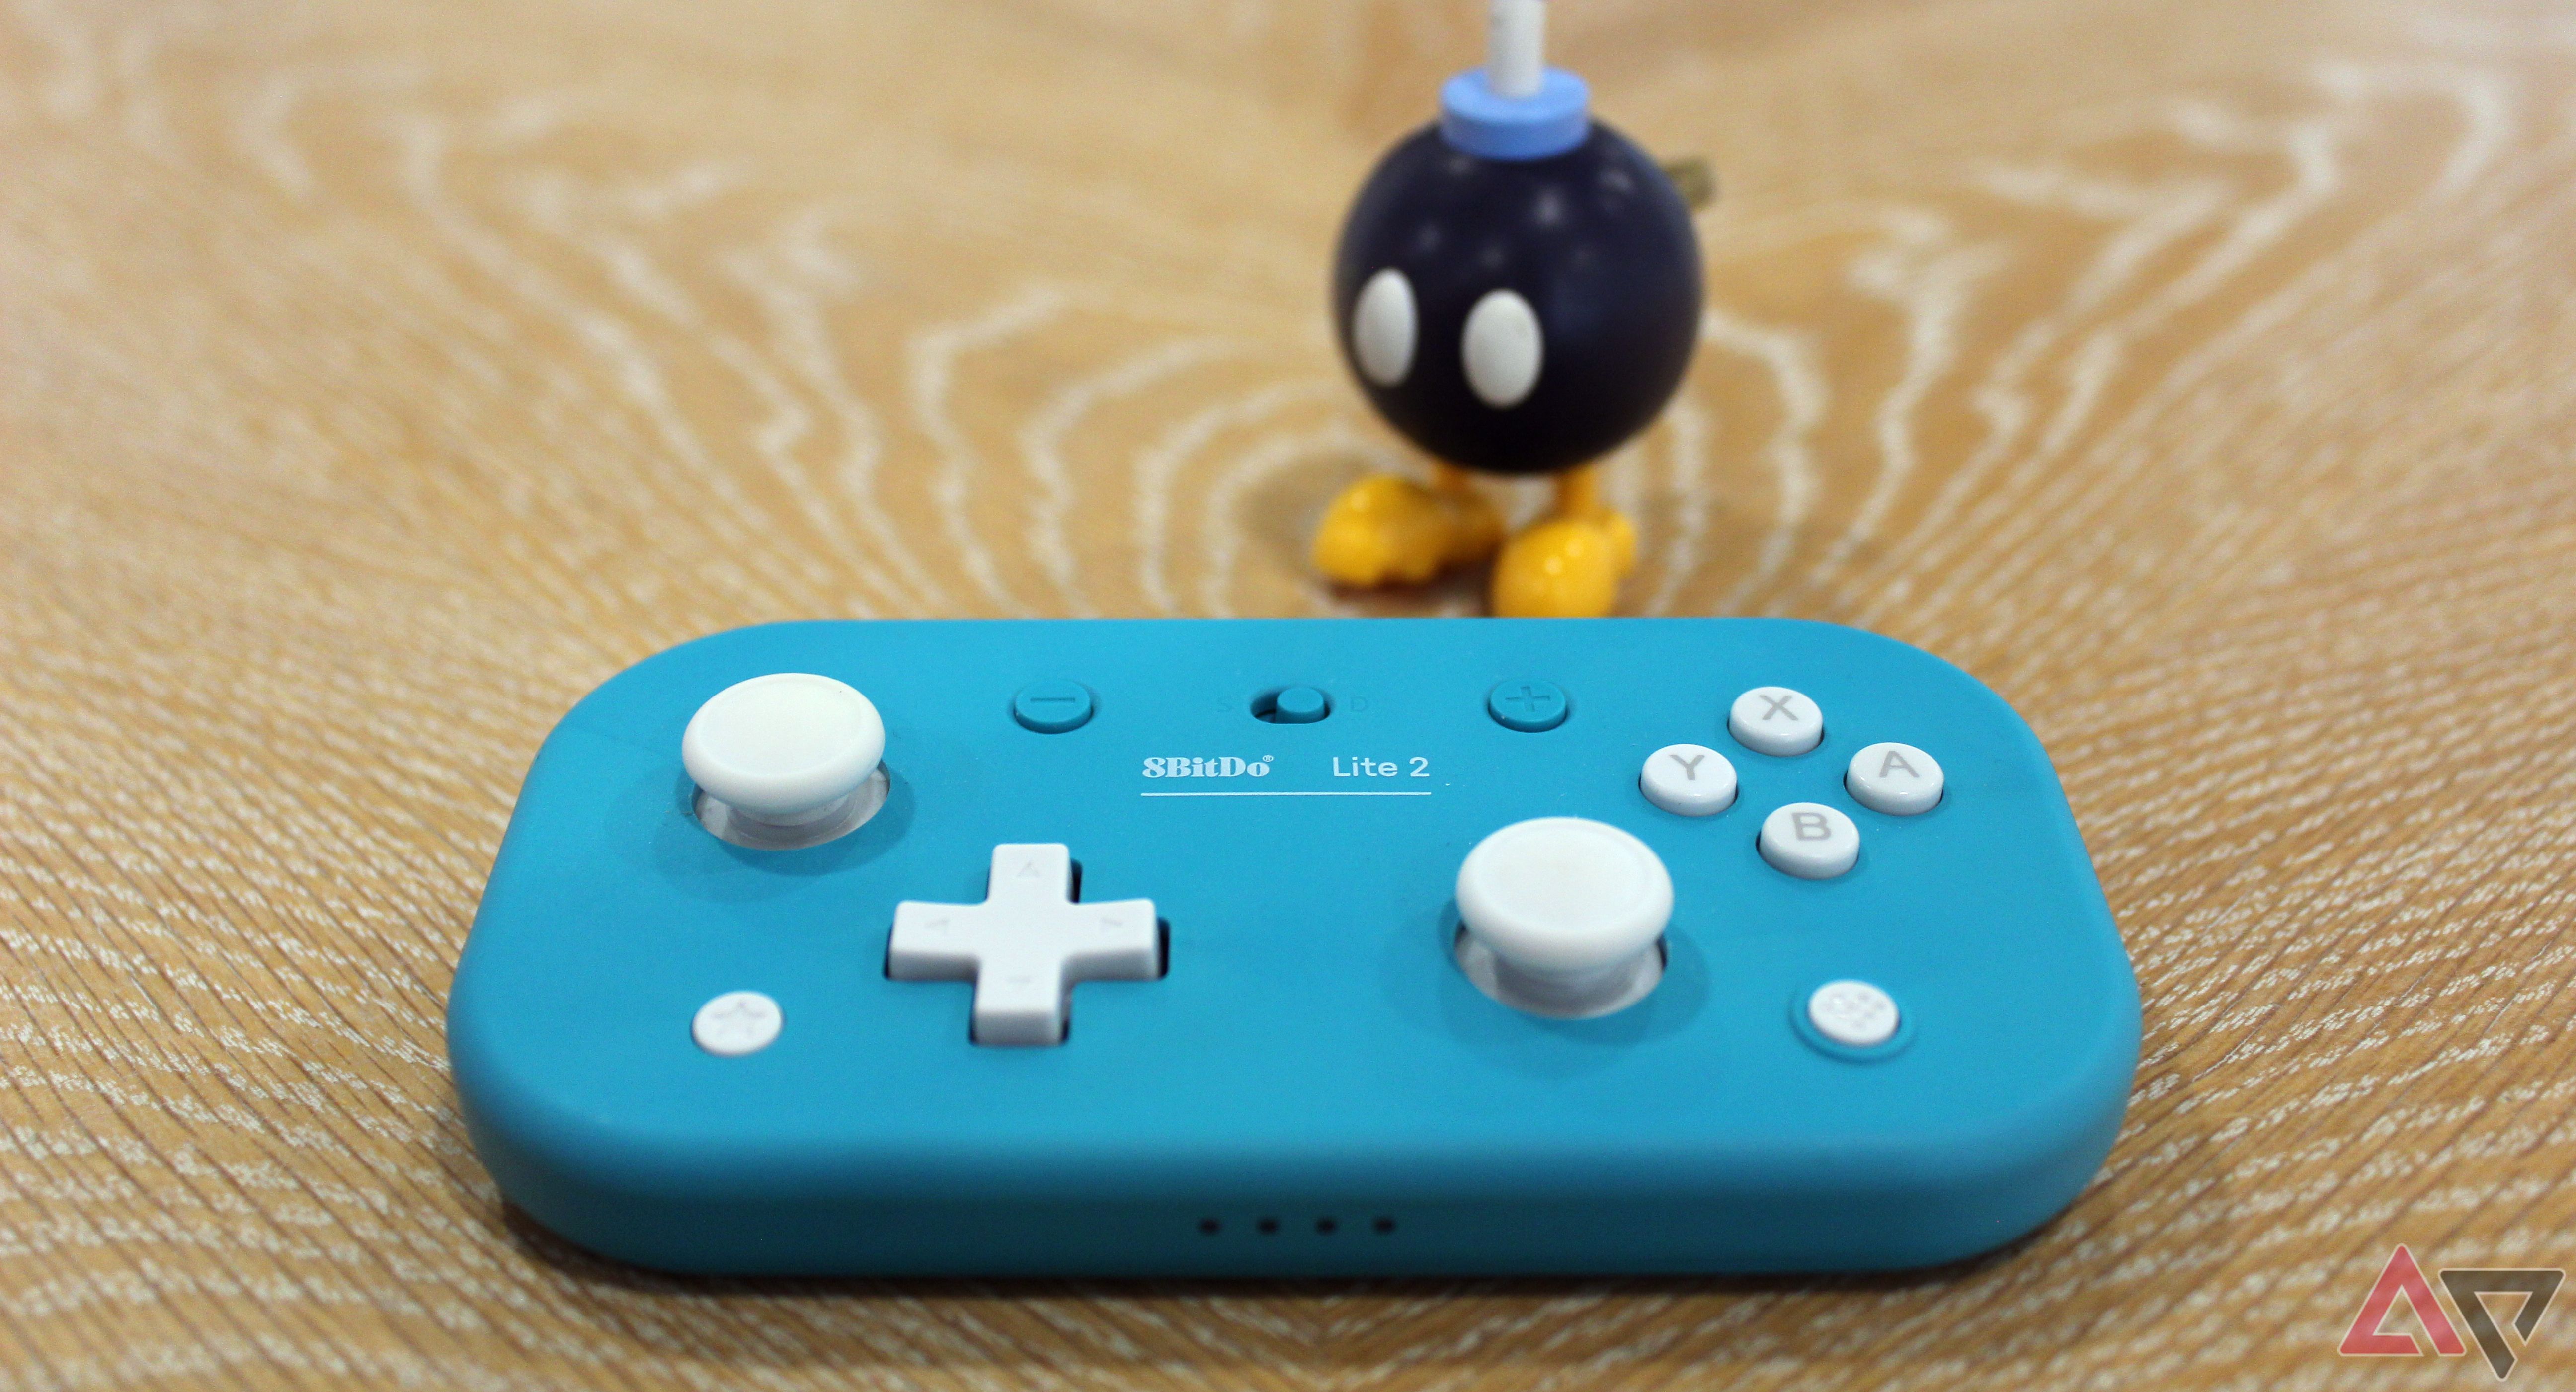 8BitDo Lite 2 controller with Bob-omb